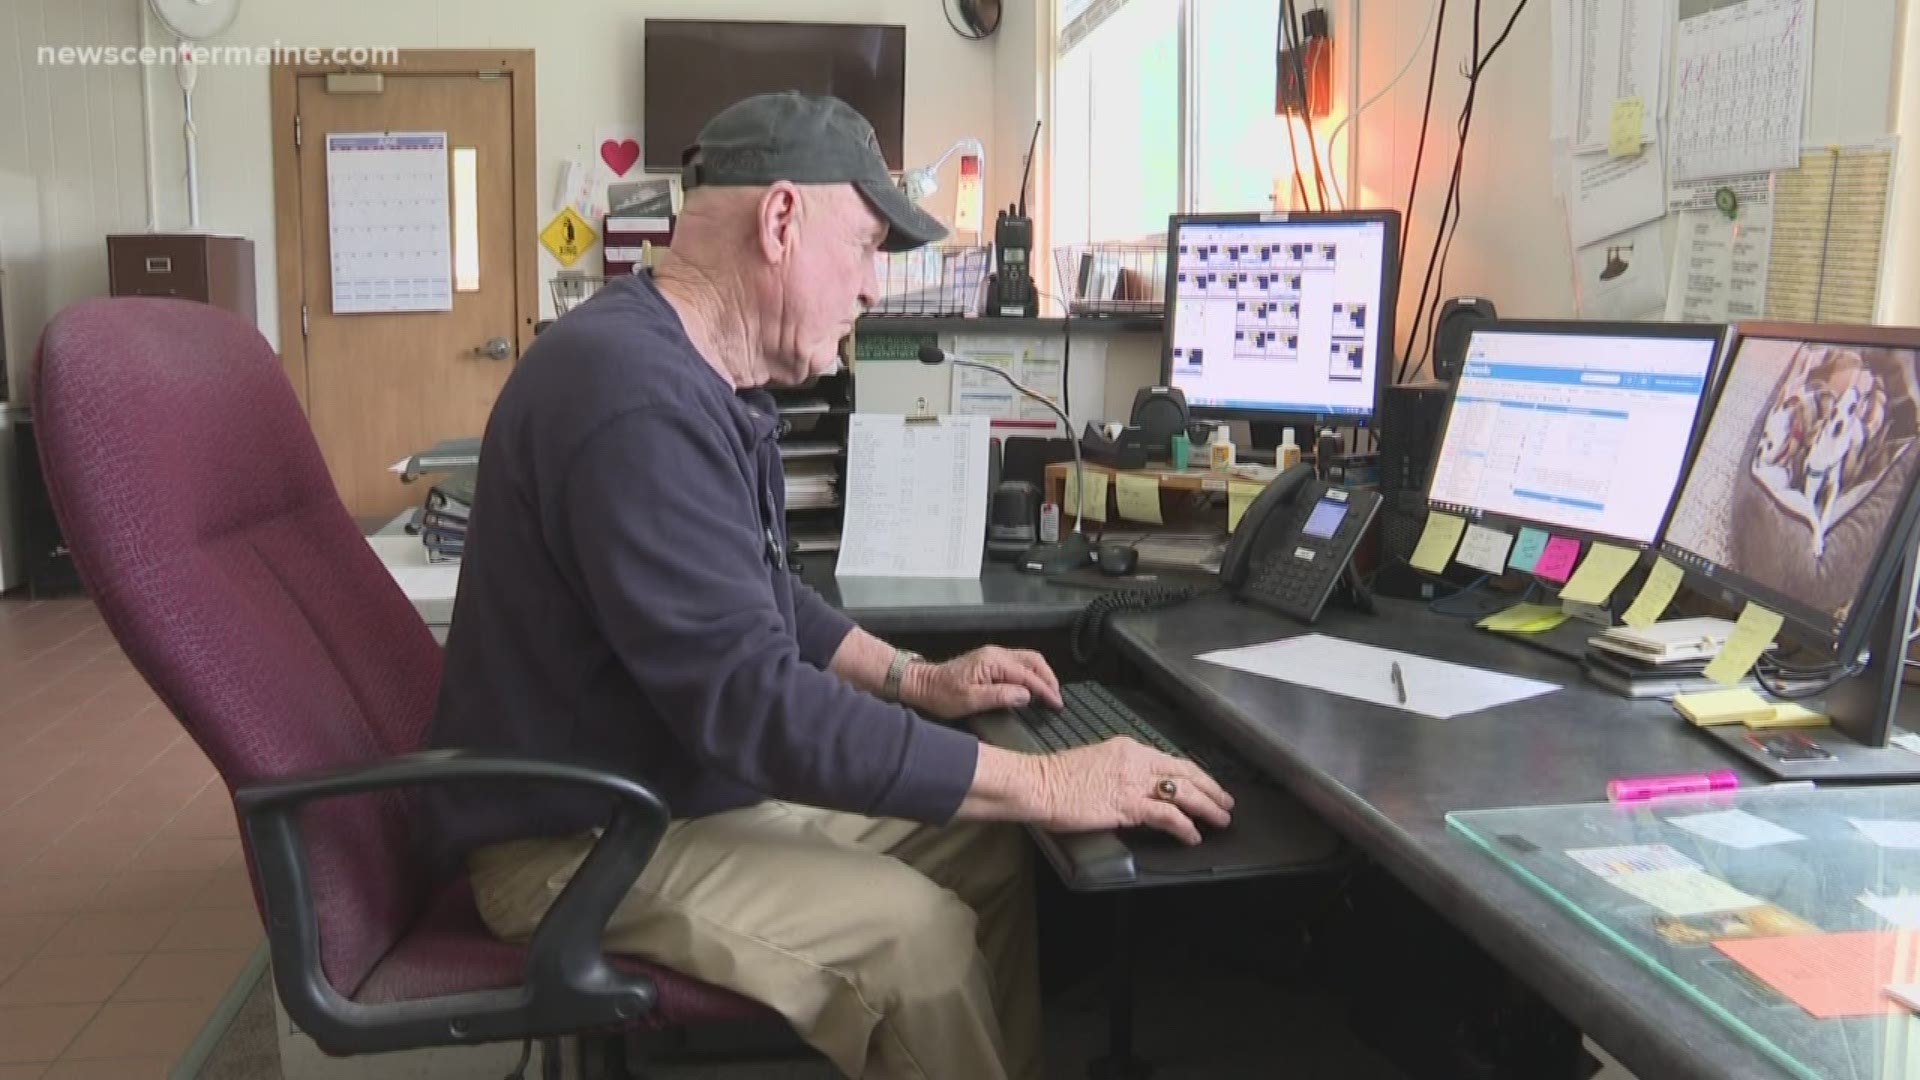 Senior dispatcher Maynard Sprague is retiring from Portland Public Works after working there for more than half of his life.